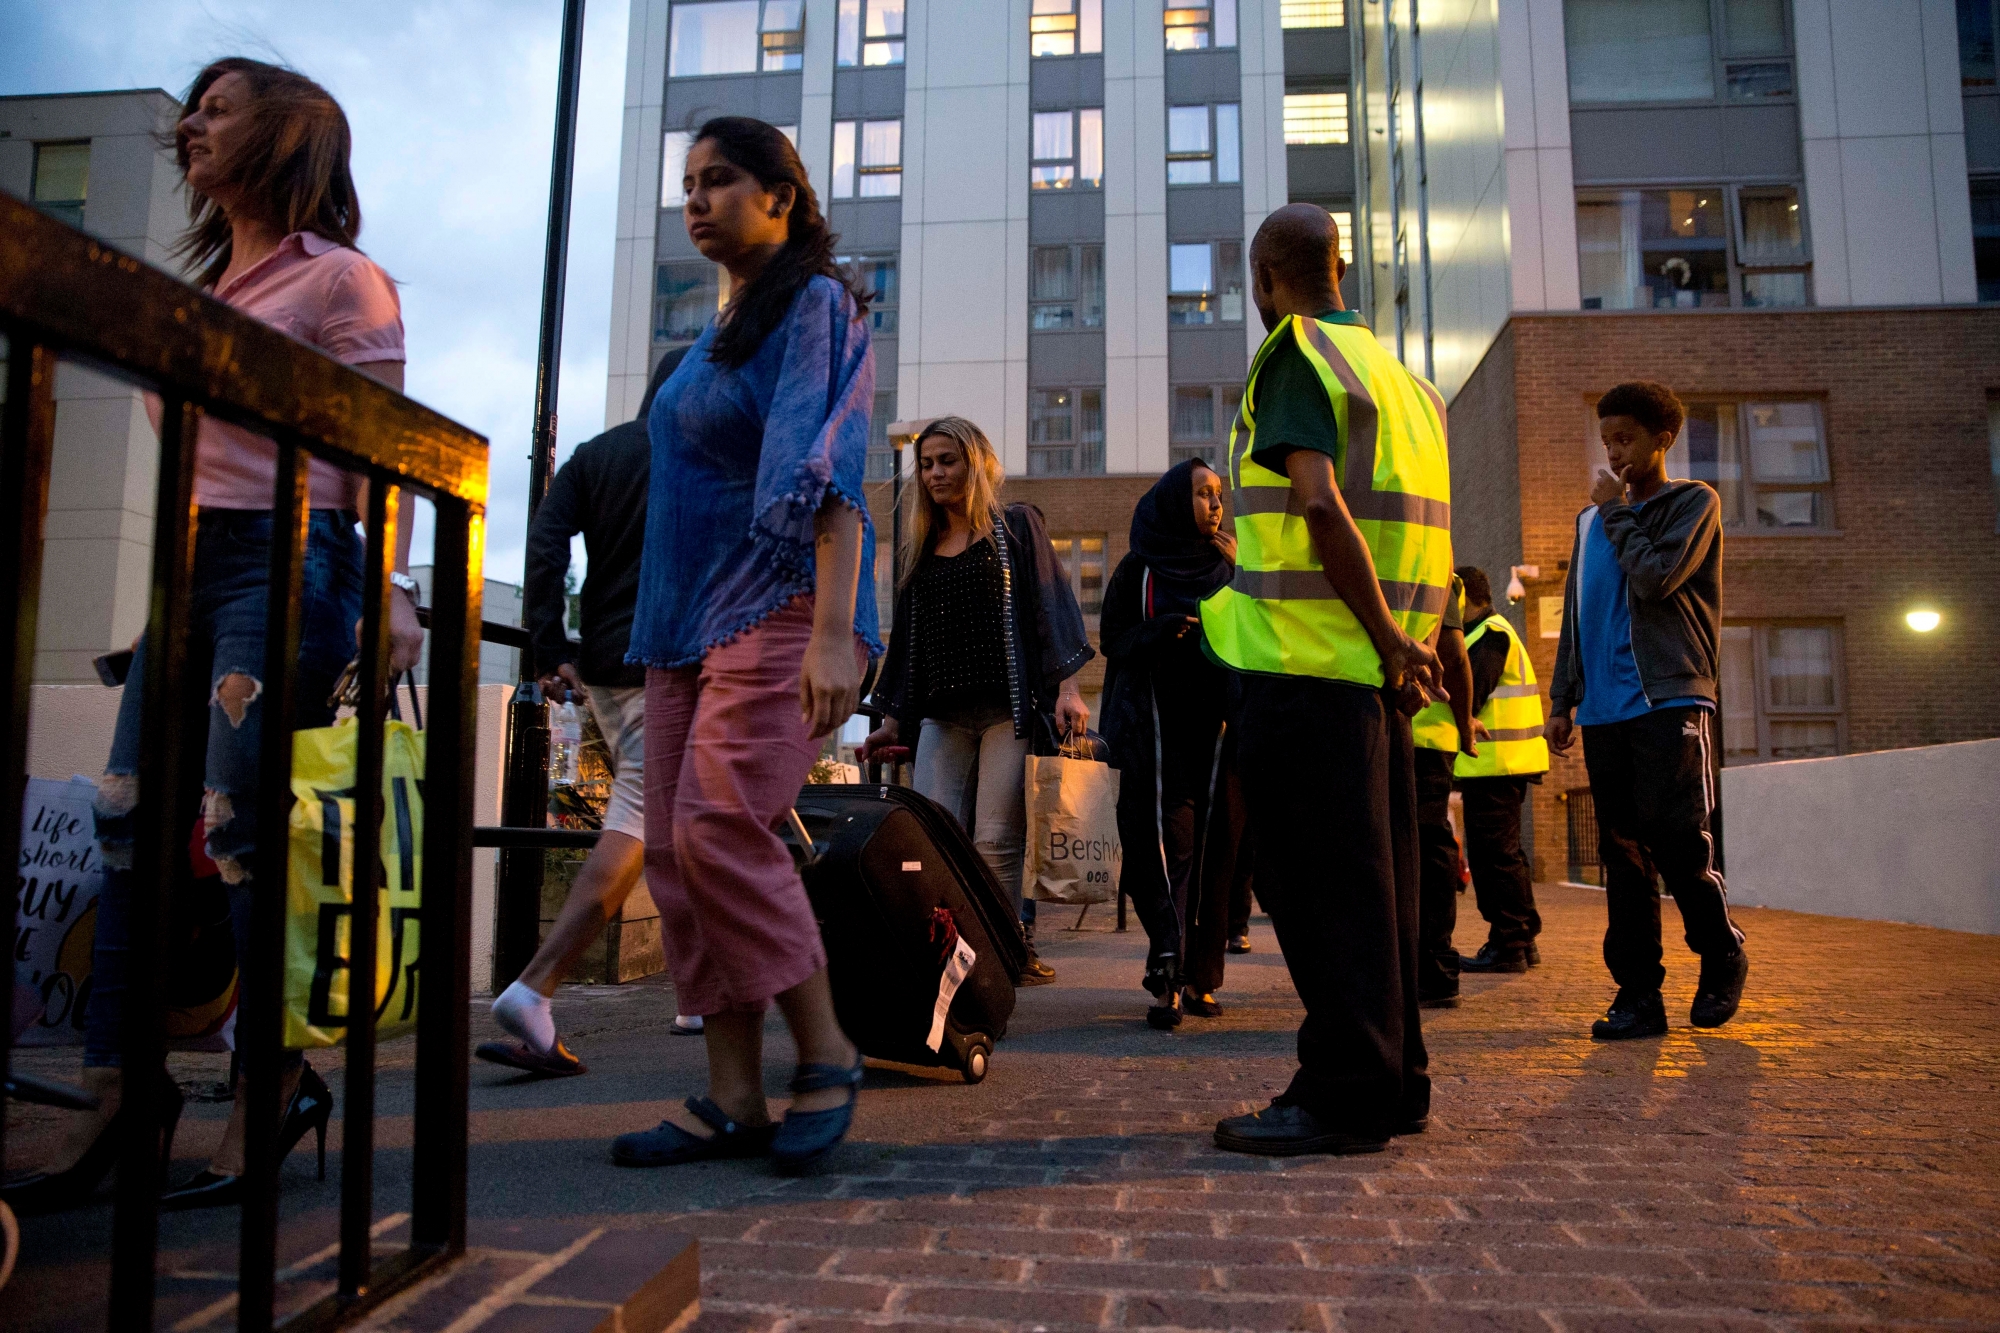 Residents are evacuated from the Taplow residential tower block on the Chalcots Estate, in the borough of Camden, north London, Friday, June 23, 2017. A local London council has decided to evacuate some 800 households in apartment buildings it owns because of safety concerns following the devastating fire that killed 79 people in a west London high-rise. (AP Photo/Alastair Grant) Britain London Fire